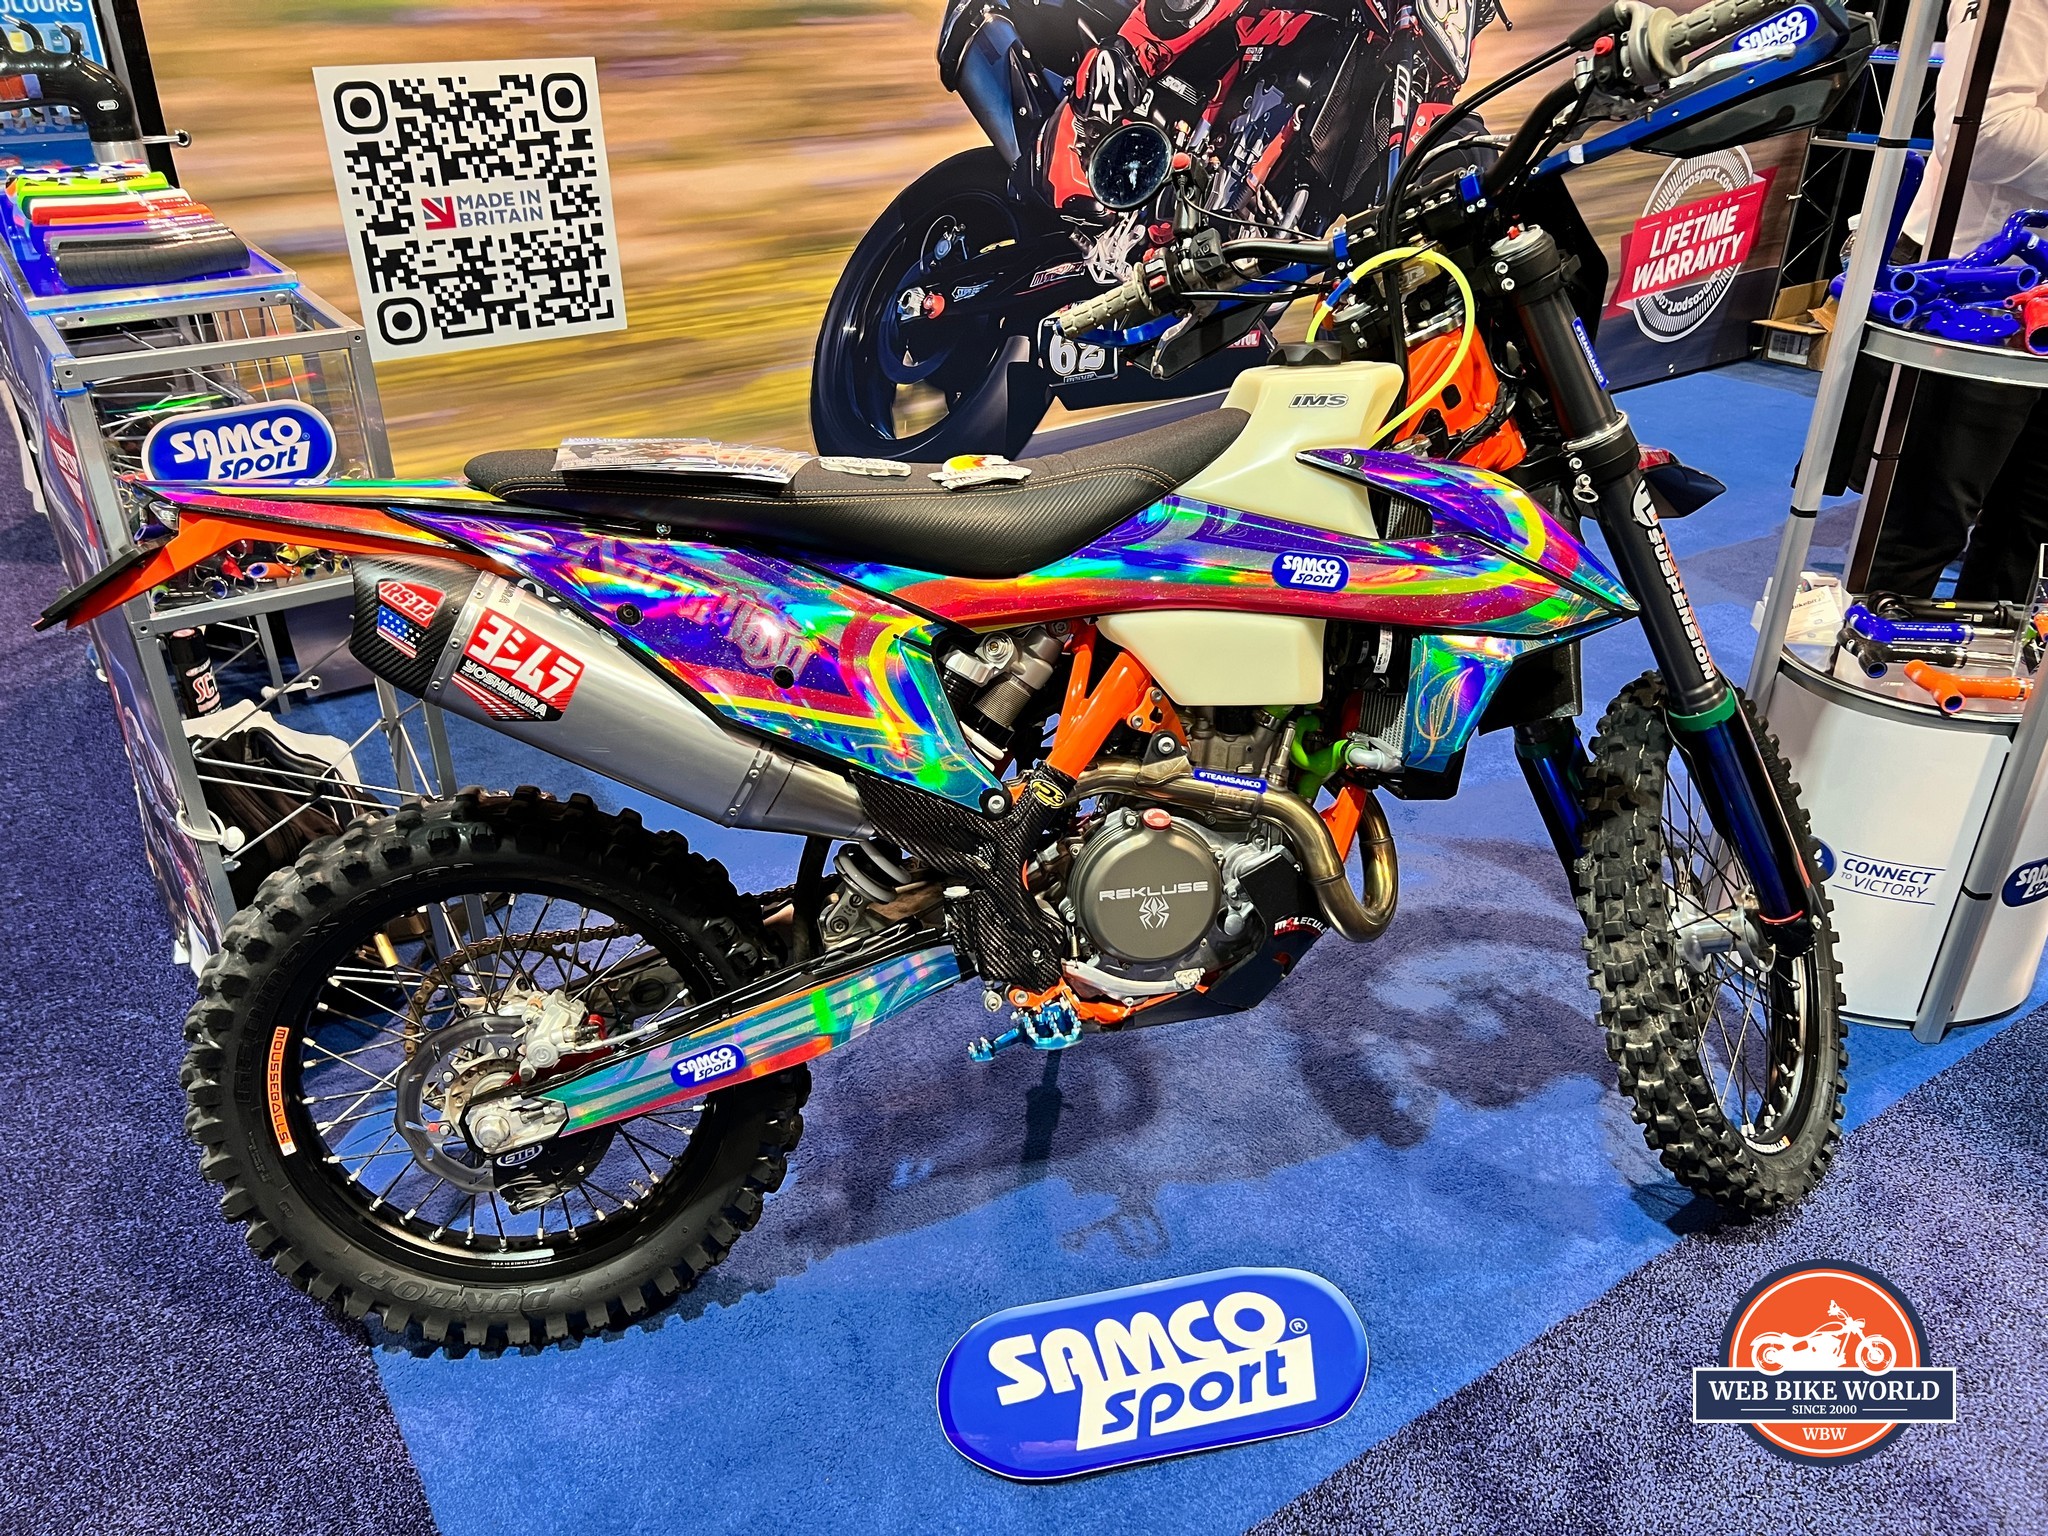 Rainbow wrap from Taco Moto Co on KTM motorcycle